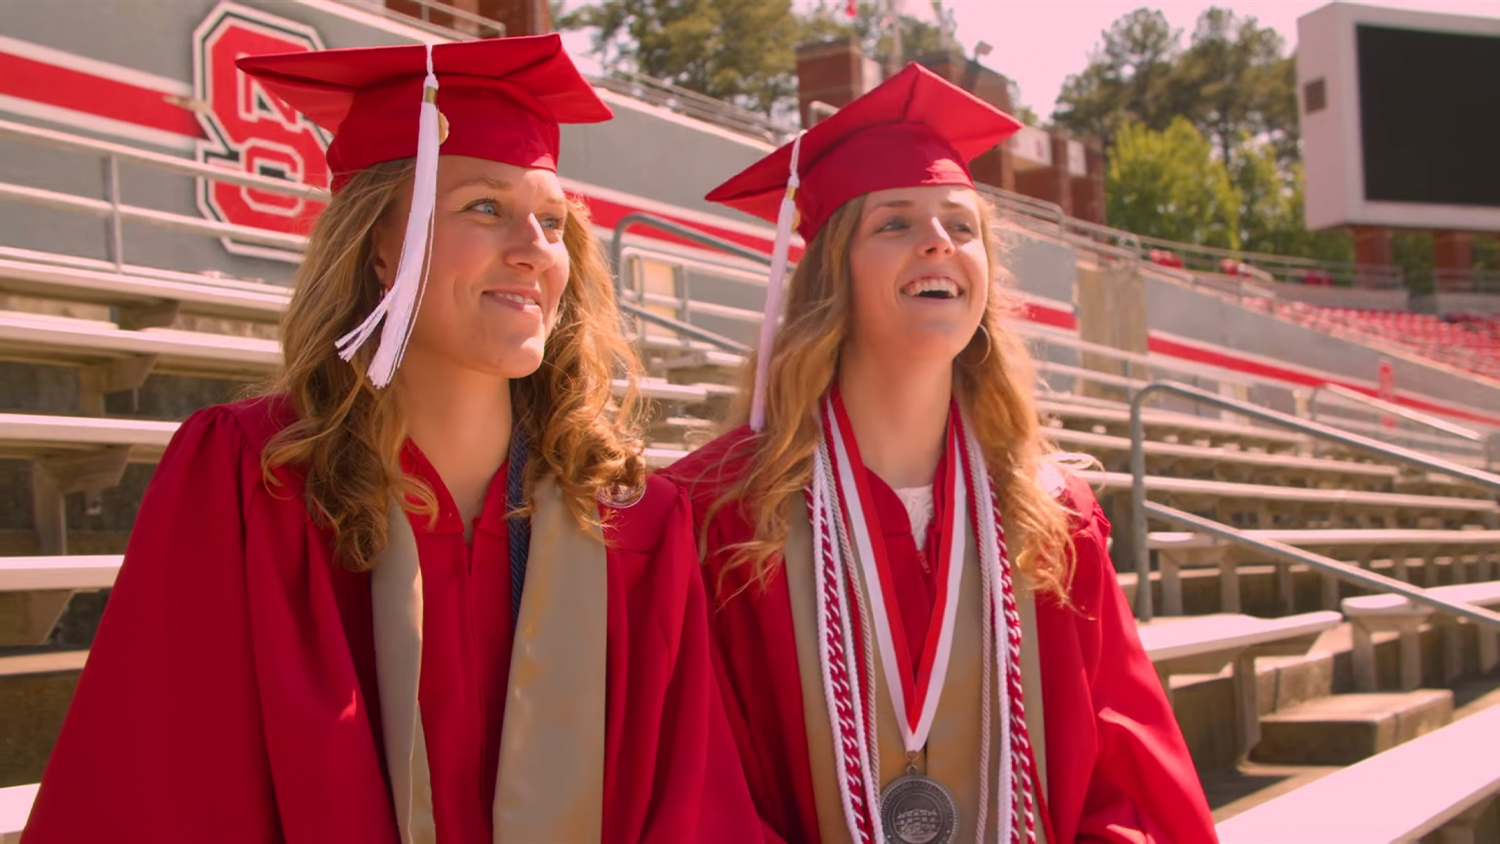 Alyssa McInnis and Emily Southard in their red graduation robes, sitting in the stands of Carter Finley Stadium